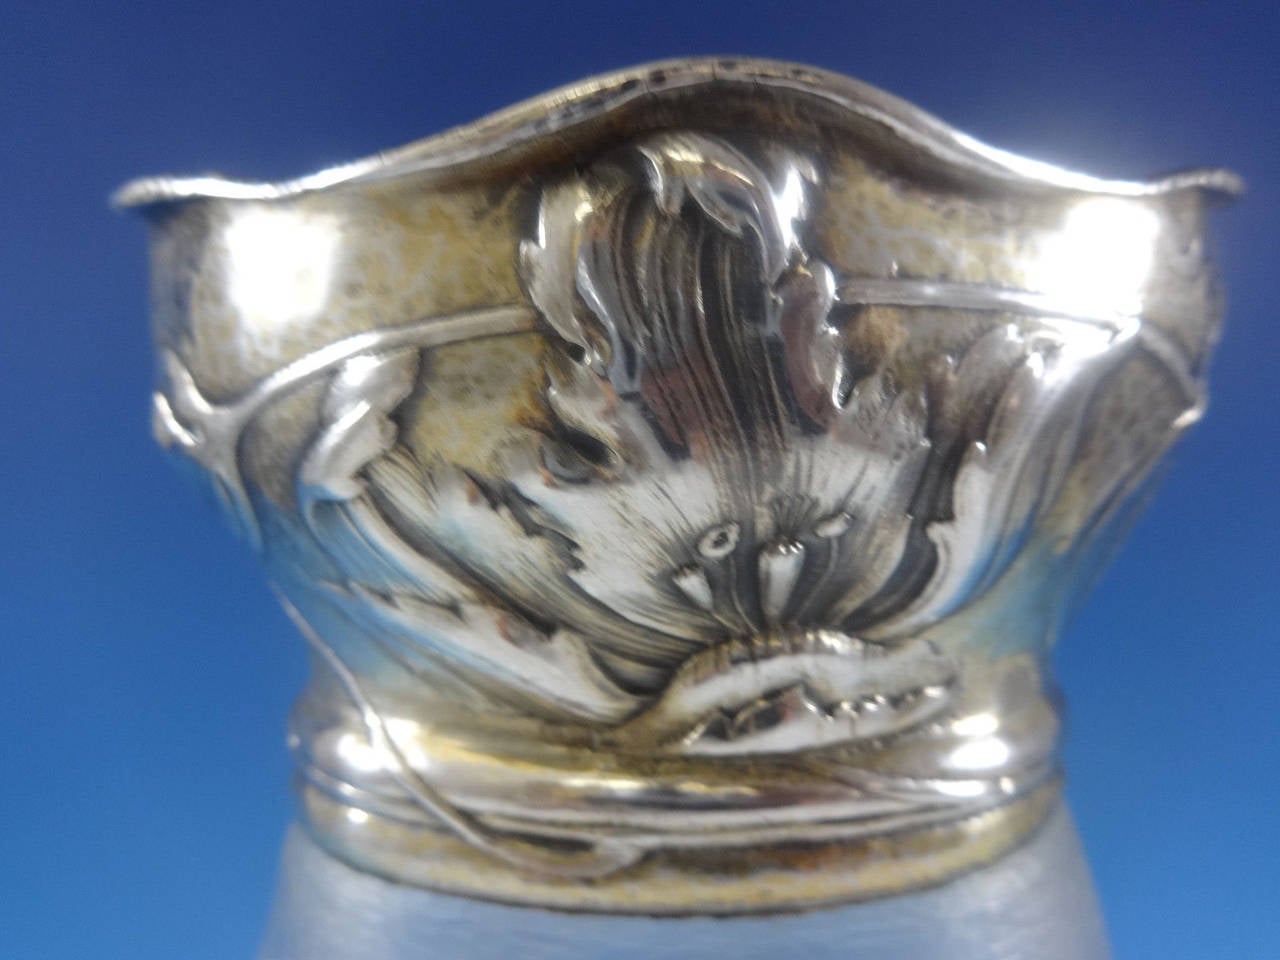 Martele By Gorham.
Art Nouveau martele by Gorham .9584 sterling silver mounted etched French glass vase with beautiful floral motif. It was made in September of 1905, took 16 hours to form, and was chased for 20 hours. It measures 13 1/2